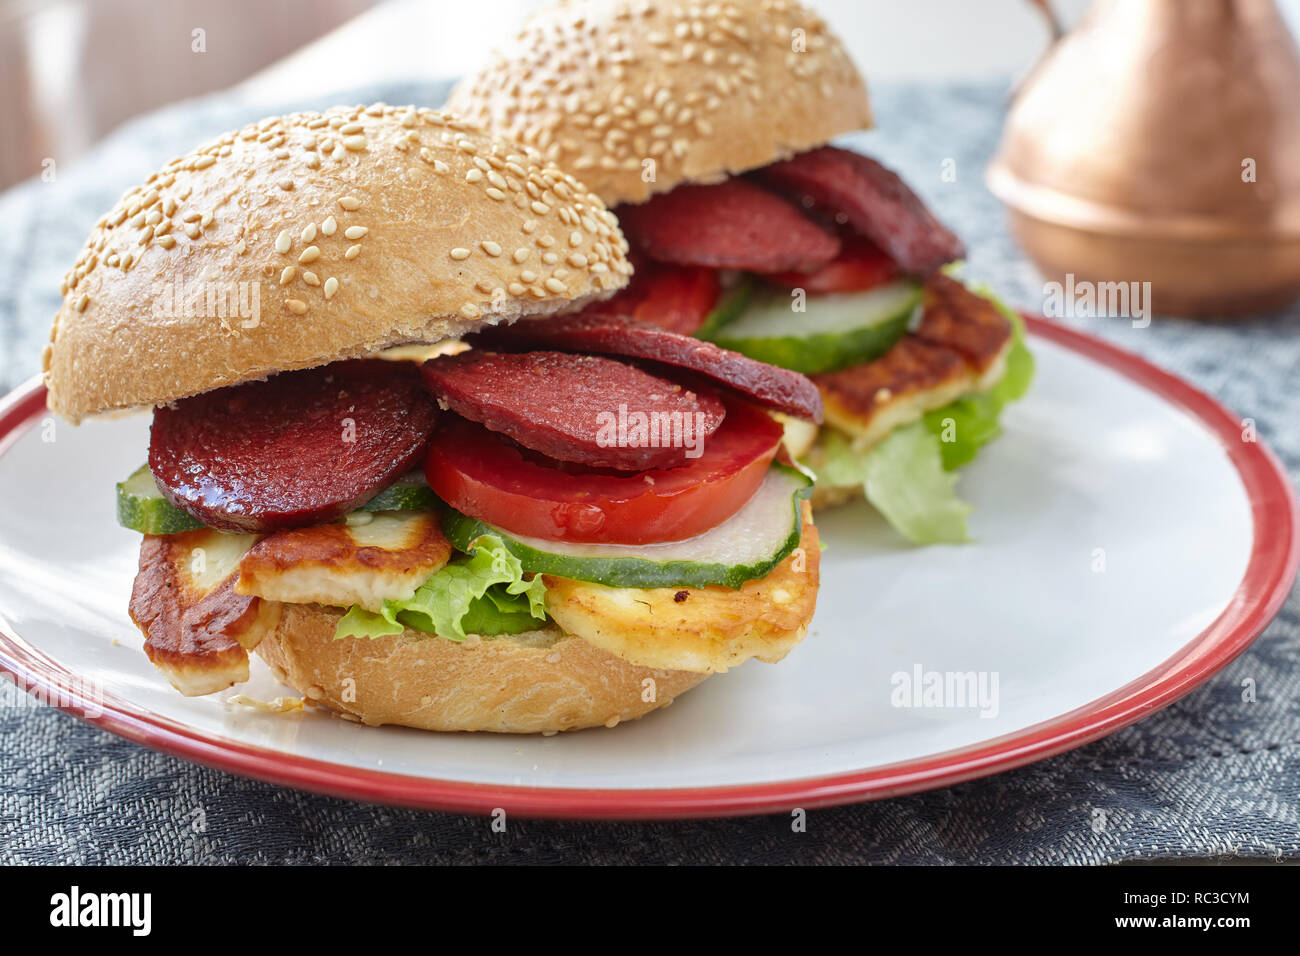 Turkish burgers with sucuk, halloumi cheese, and vegetables Stock Photo